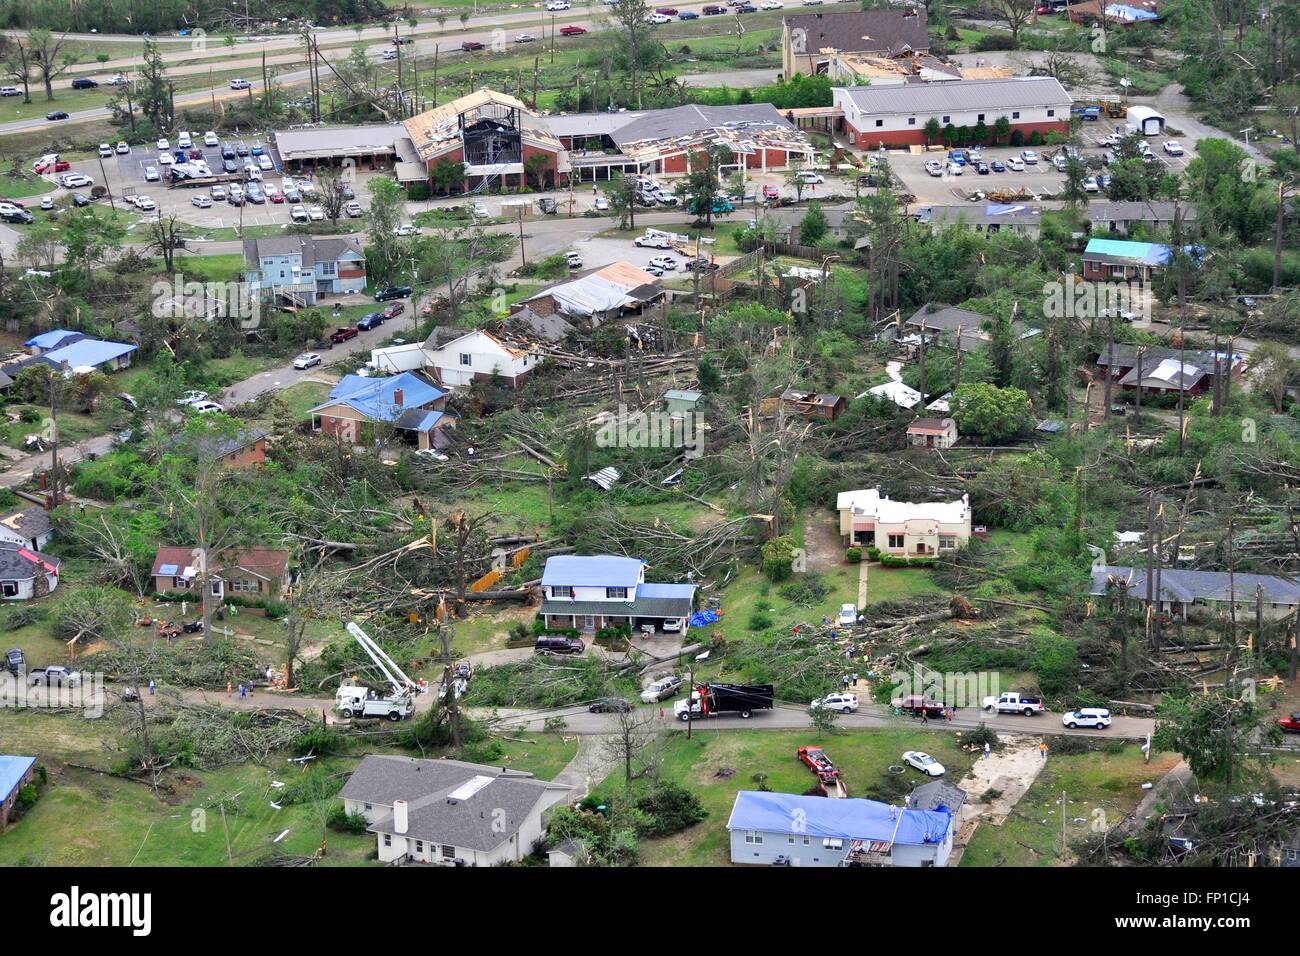 Aerial view of St. Luke United Methodist Church and homes destroyed by tornadoes that swept across the southern states killing 35 people April 29, 2014 in Tupelo, Mississippi. Stock Photo